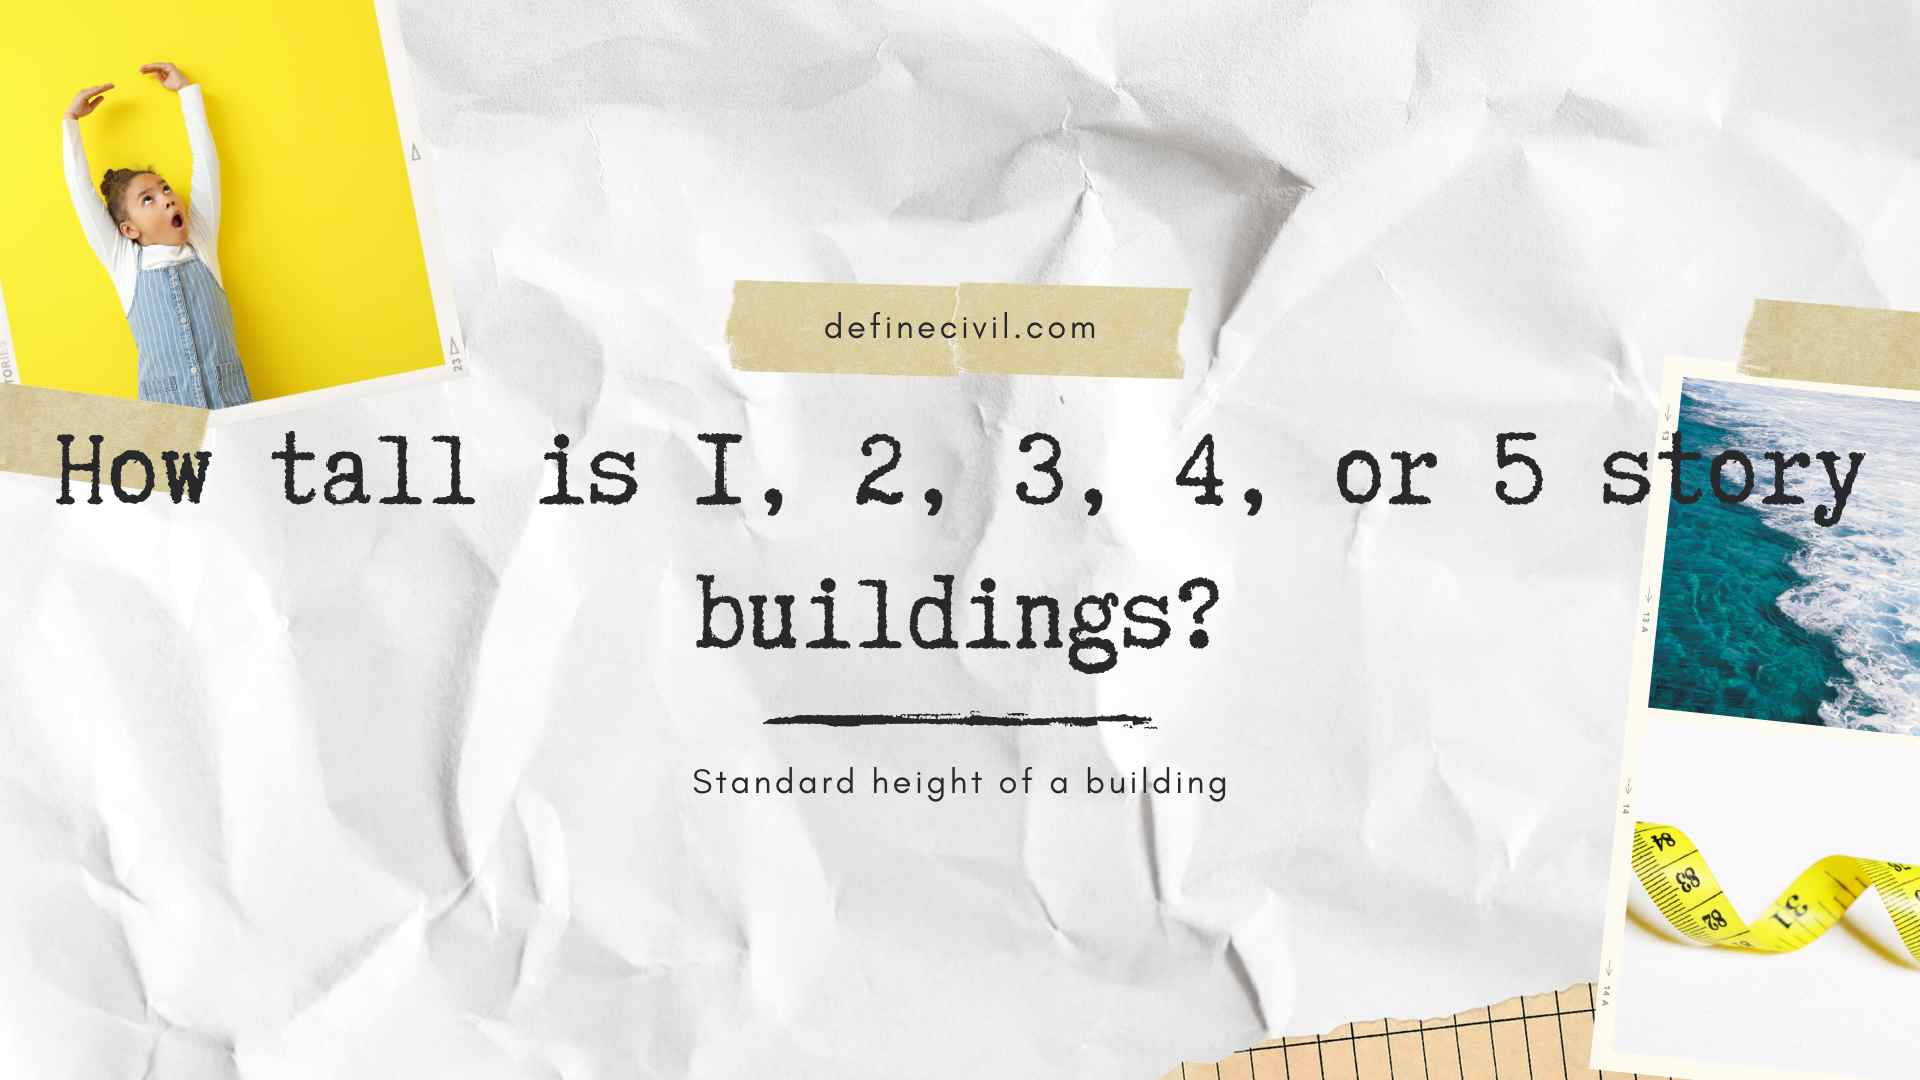 How tall is 1, 2, 3, 4, or 5 story buildings? Standard height of a building